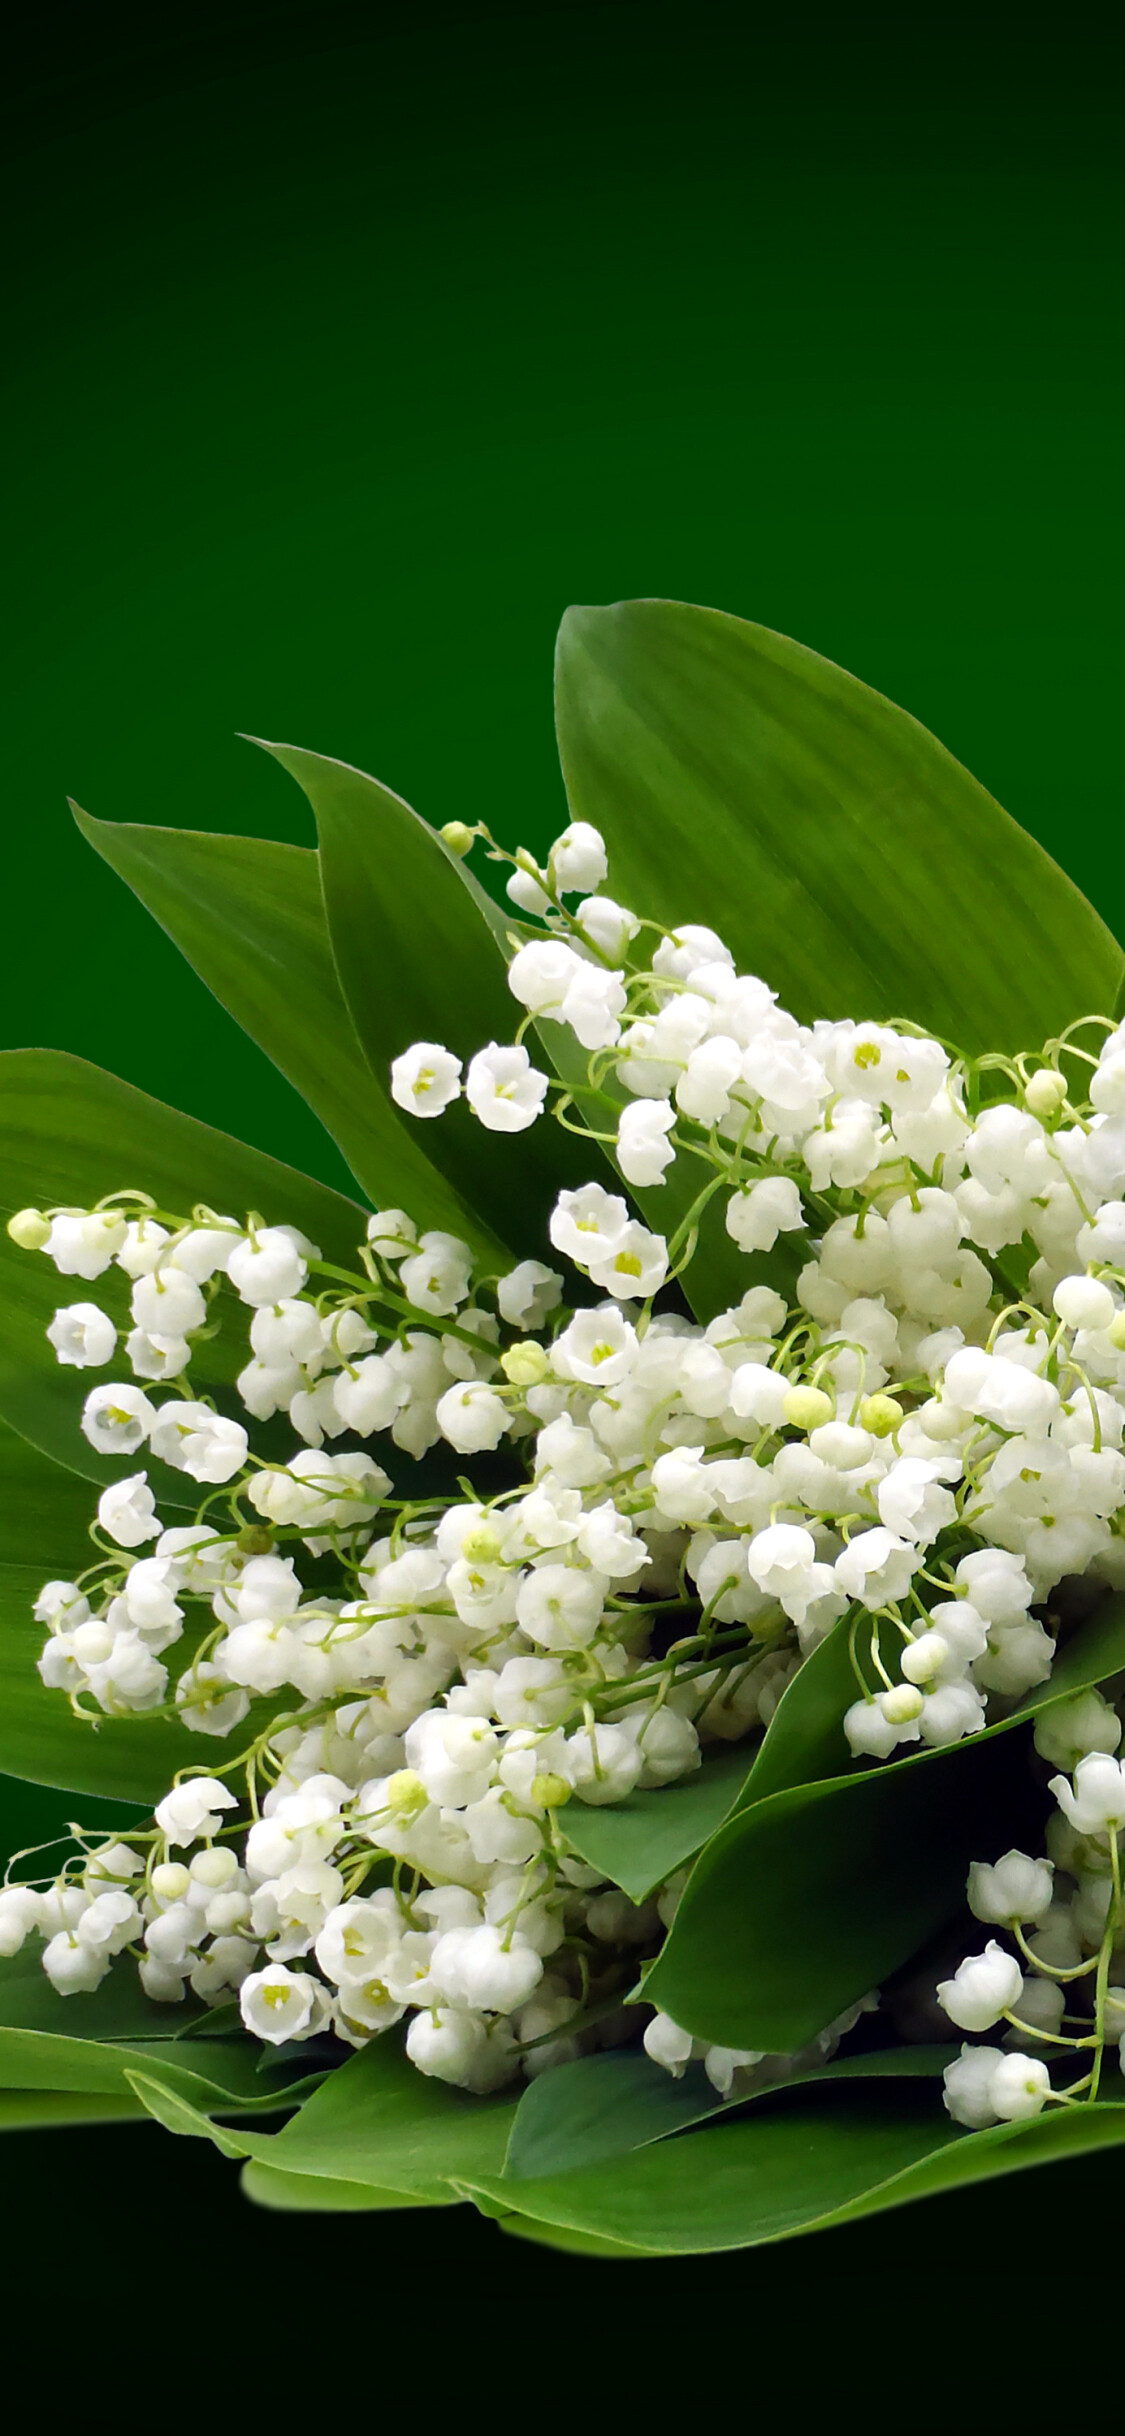 Lily of the Valley: The plant traditionally features in spring wedding bouquets, Our Lady's tears. 1130x2440 HD Background.